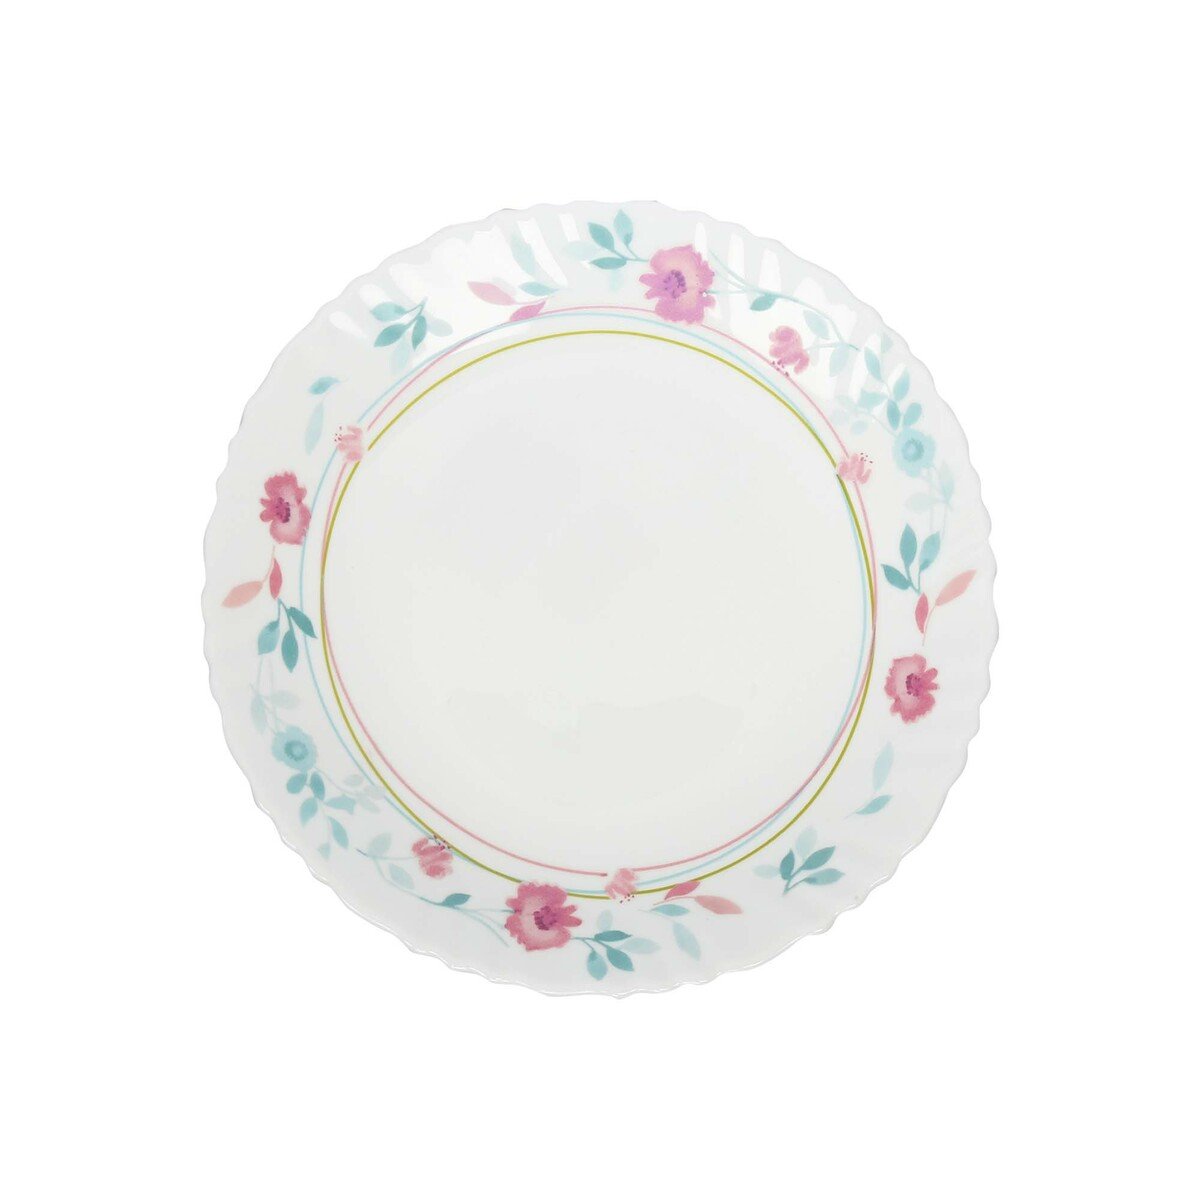 Chefline Soup Plate 8.5in 1050 FLO